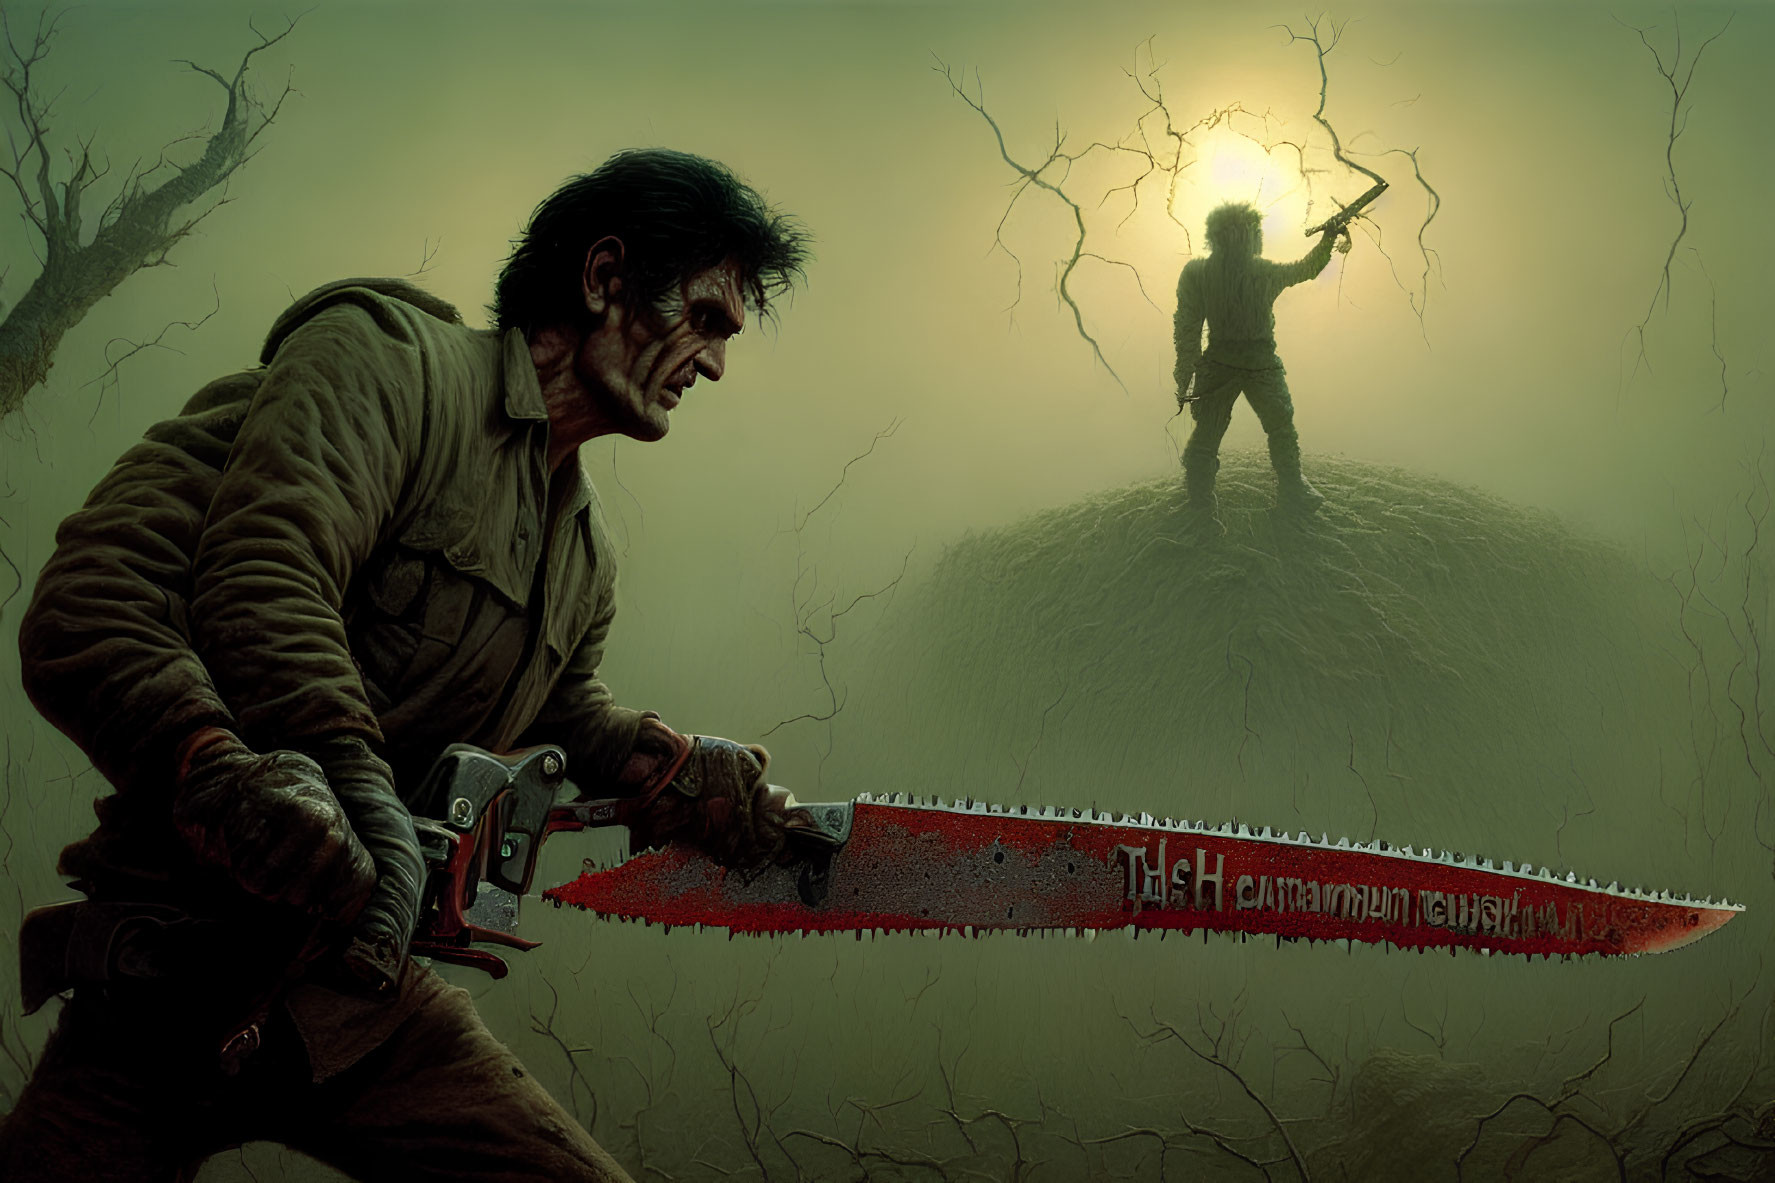 Chainsaw-wielding man in grim landscape with silhouette and moonlit sky